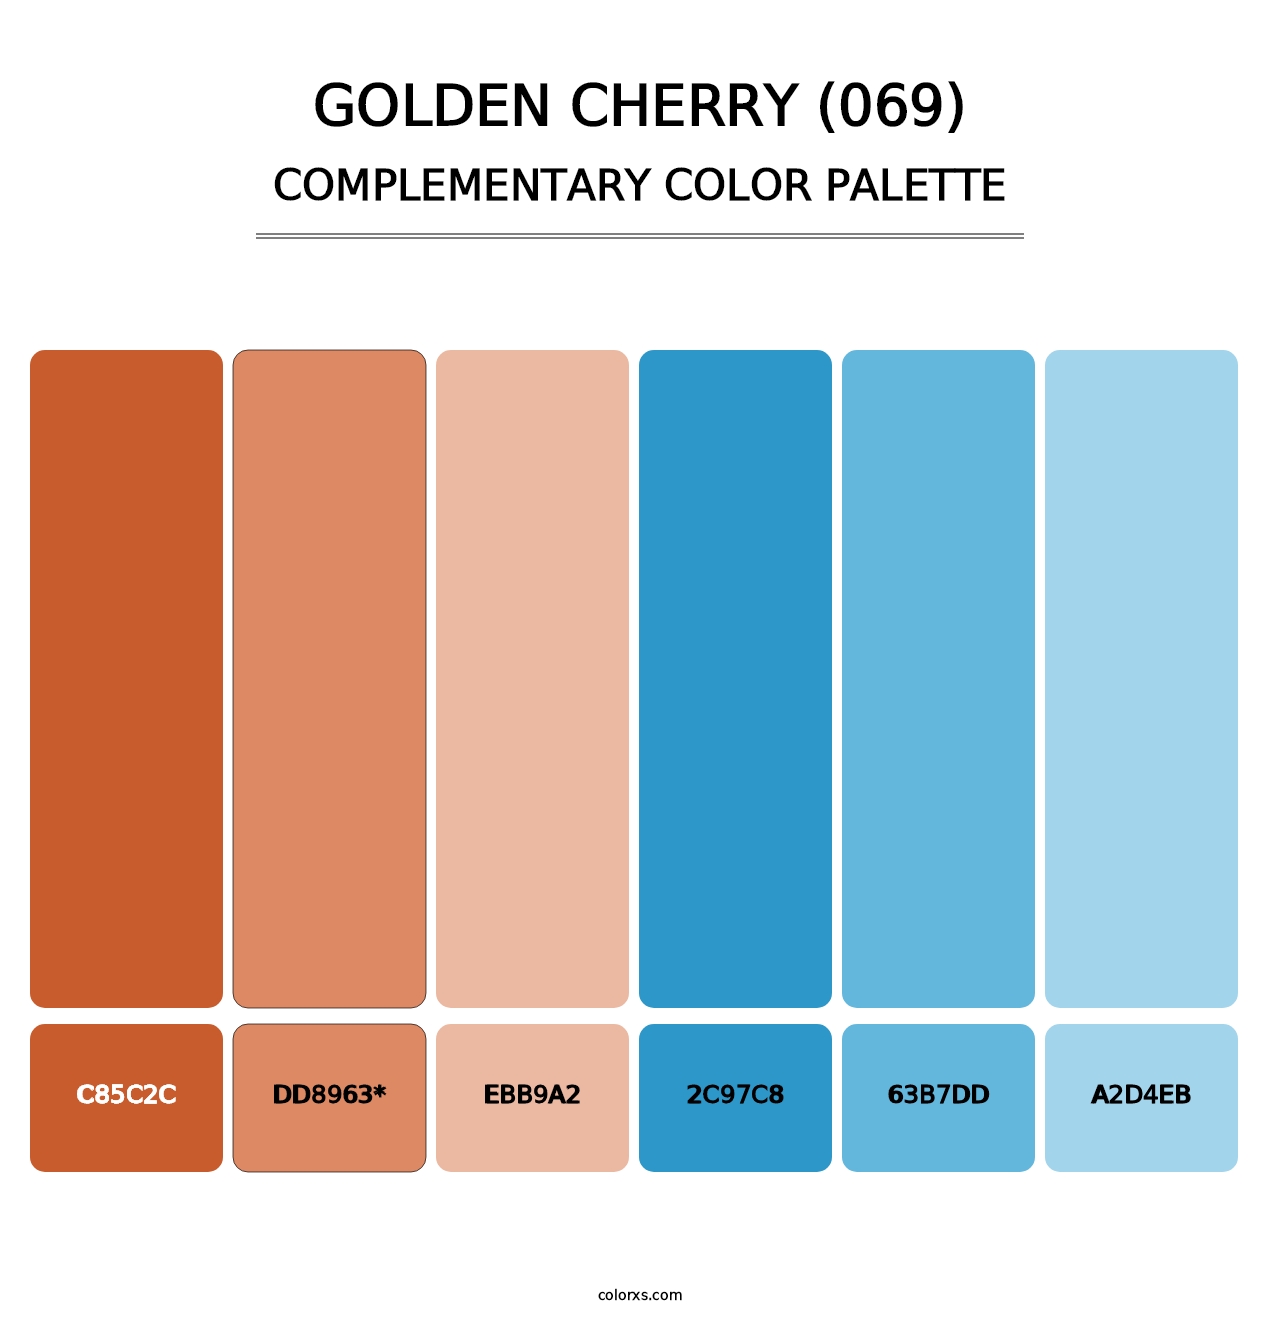 Golden Cherry (069) - Complementary Color Palette